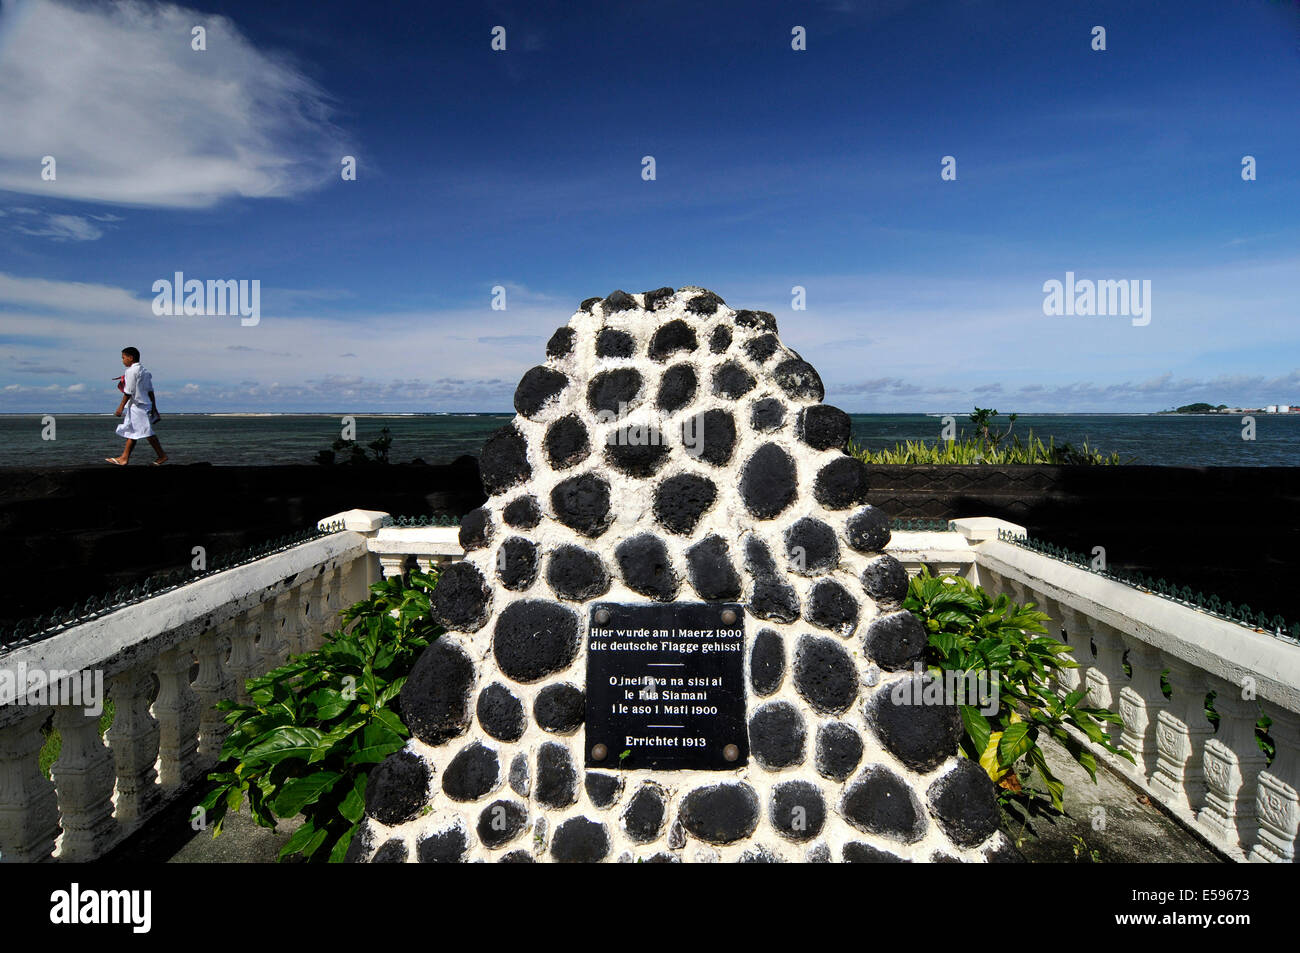 Travelling through Samoa in February 2014. Memorial stone at the place where the german flag was hoisted in March 1900 reminds of Somoa as a german colony. Stock Photo